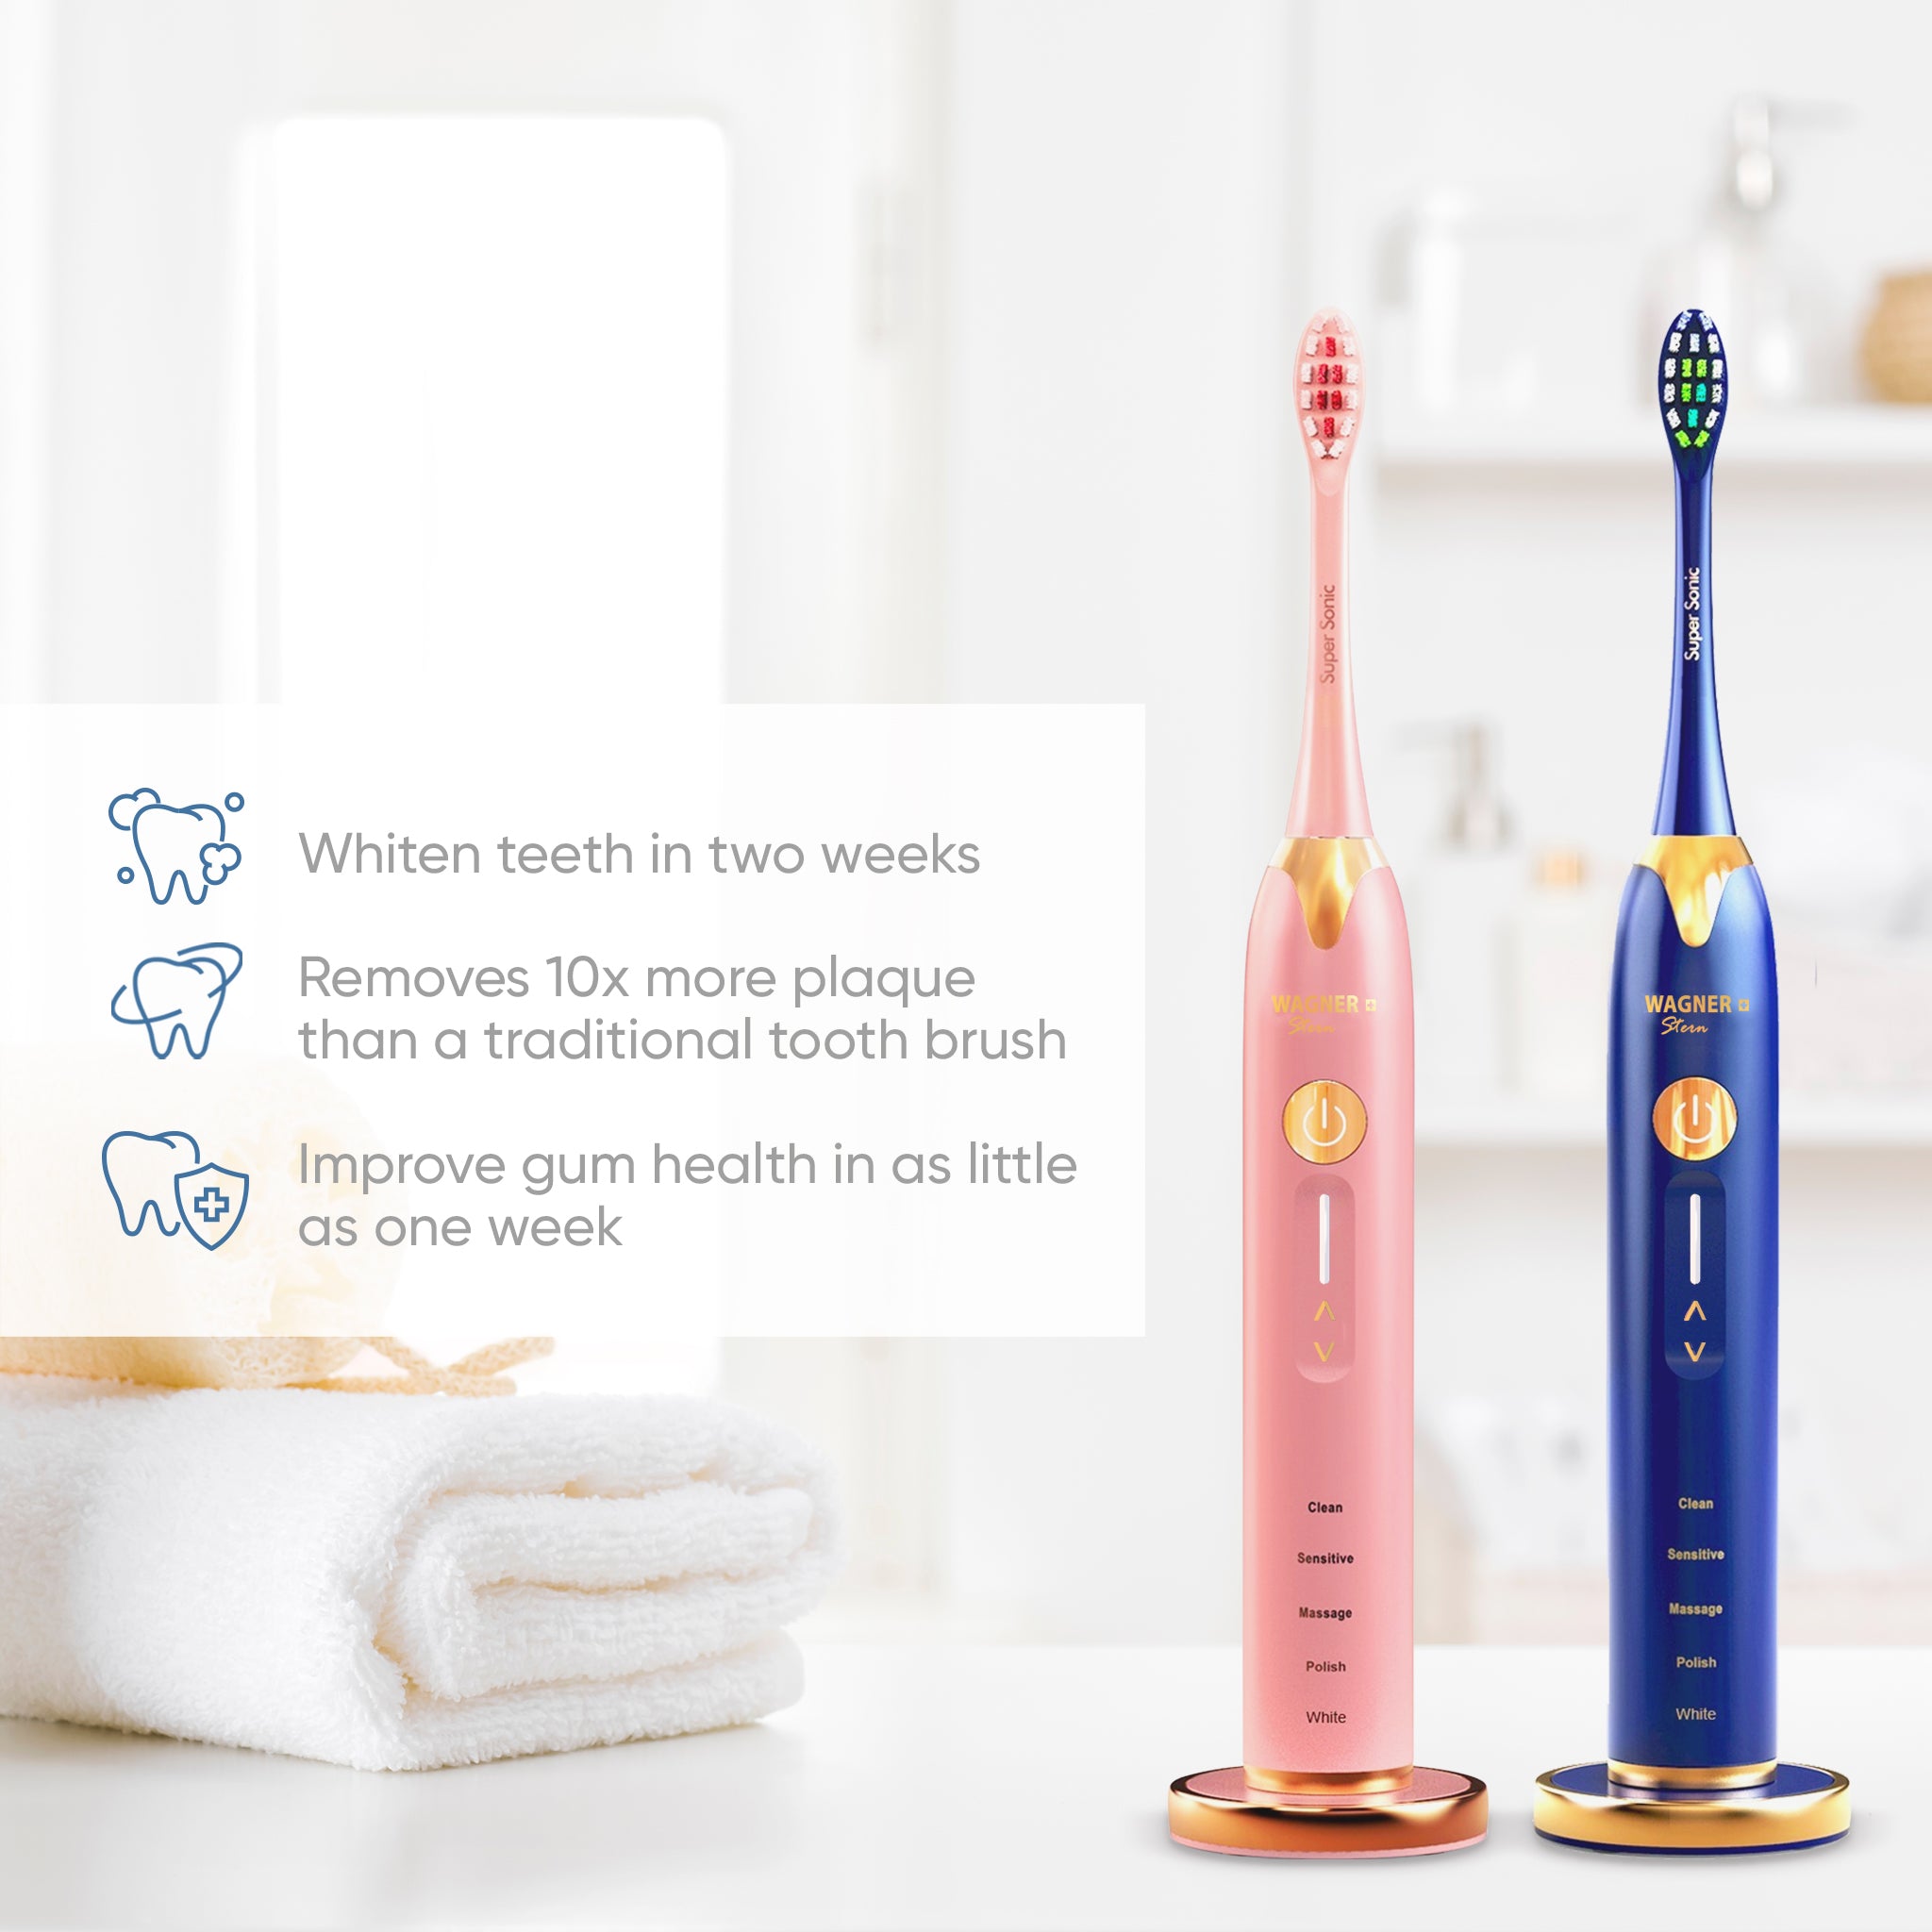 Wagner & Stern. Duette Series. 2 Electric toothbrushes with Pressure Sensor. 5 Brushing Modes and 4 Intensity Levels, 10 Dupont Bristles, 2 Premium Travel Cases. (Pink/Blue)